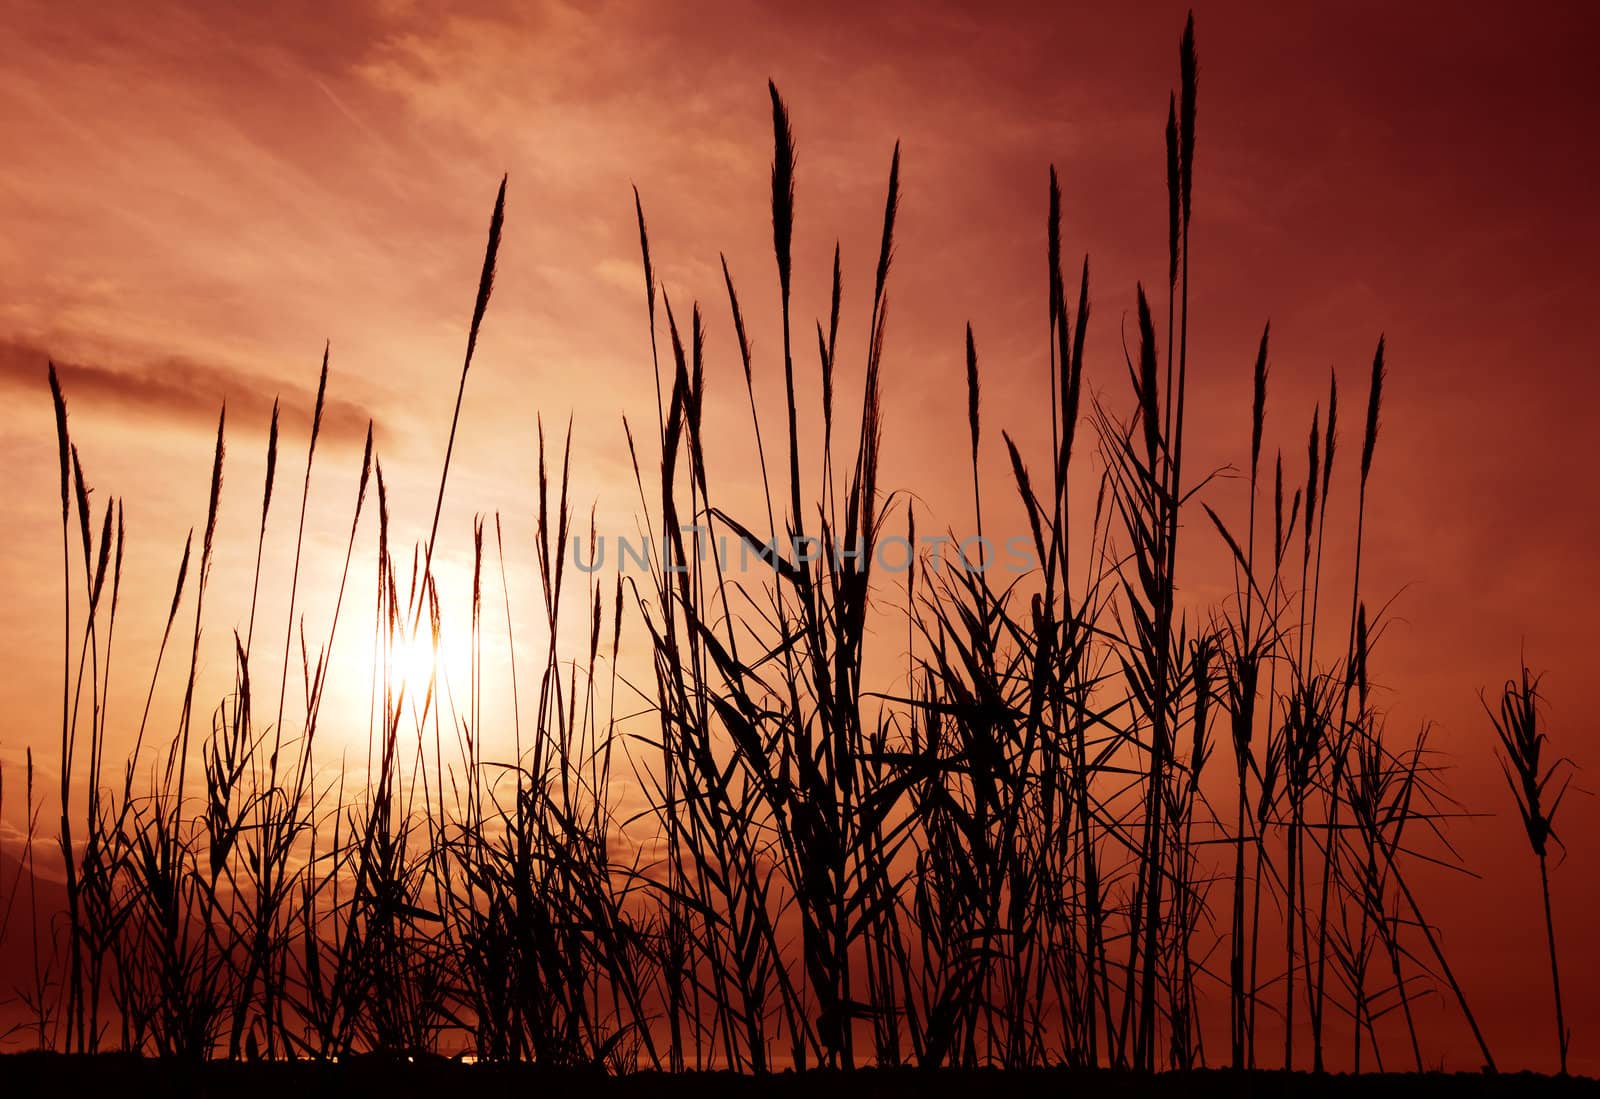 Silhouettes of reeds against a reddish and cloudy morning sky